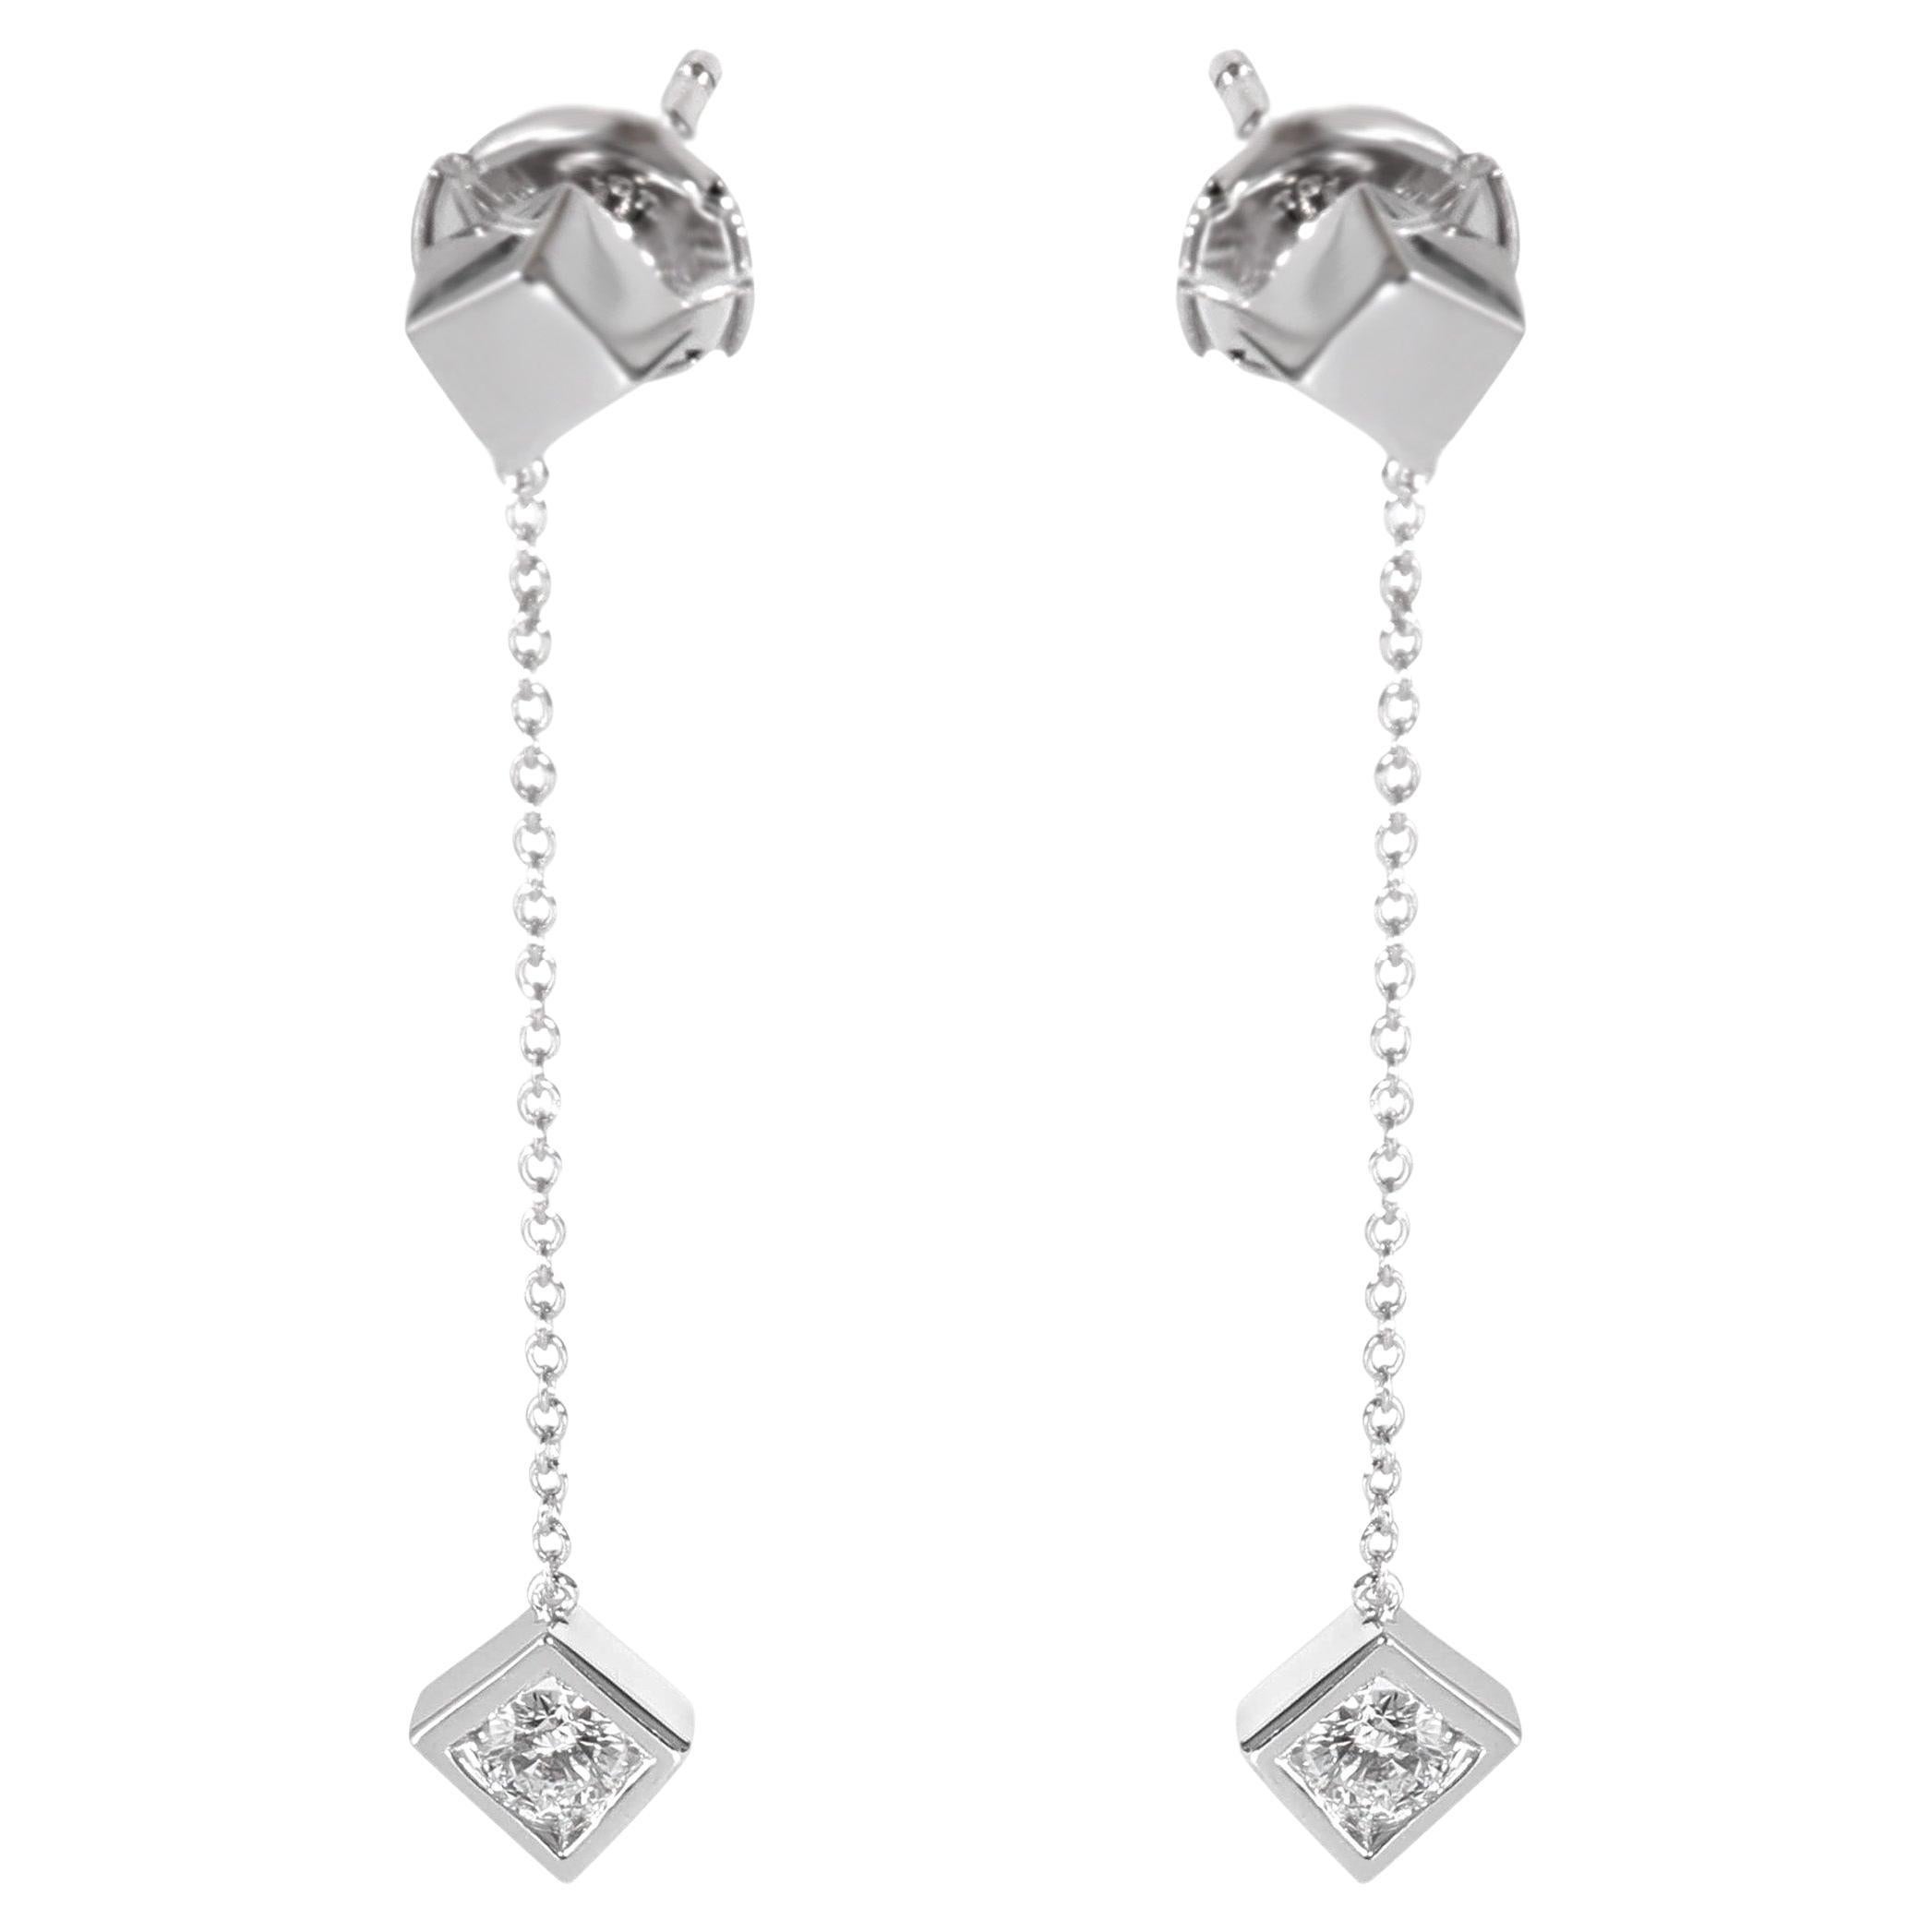 Tiffany and Co. Frank Gehry Torque Cube Drop Earring in 18k White Gold ...